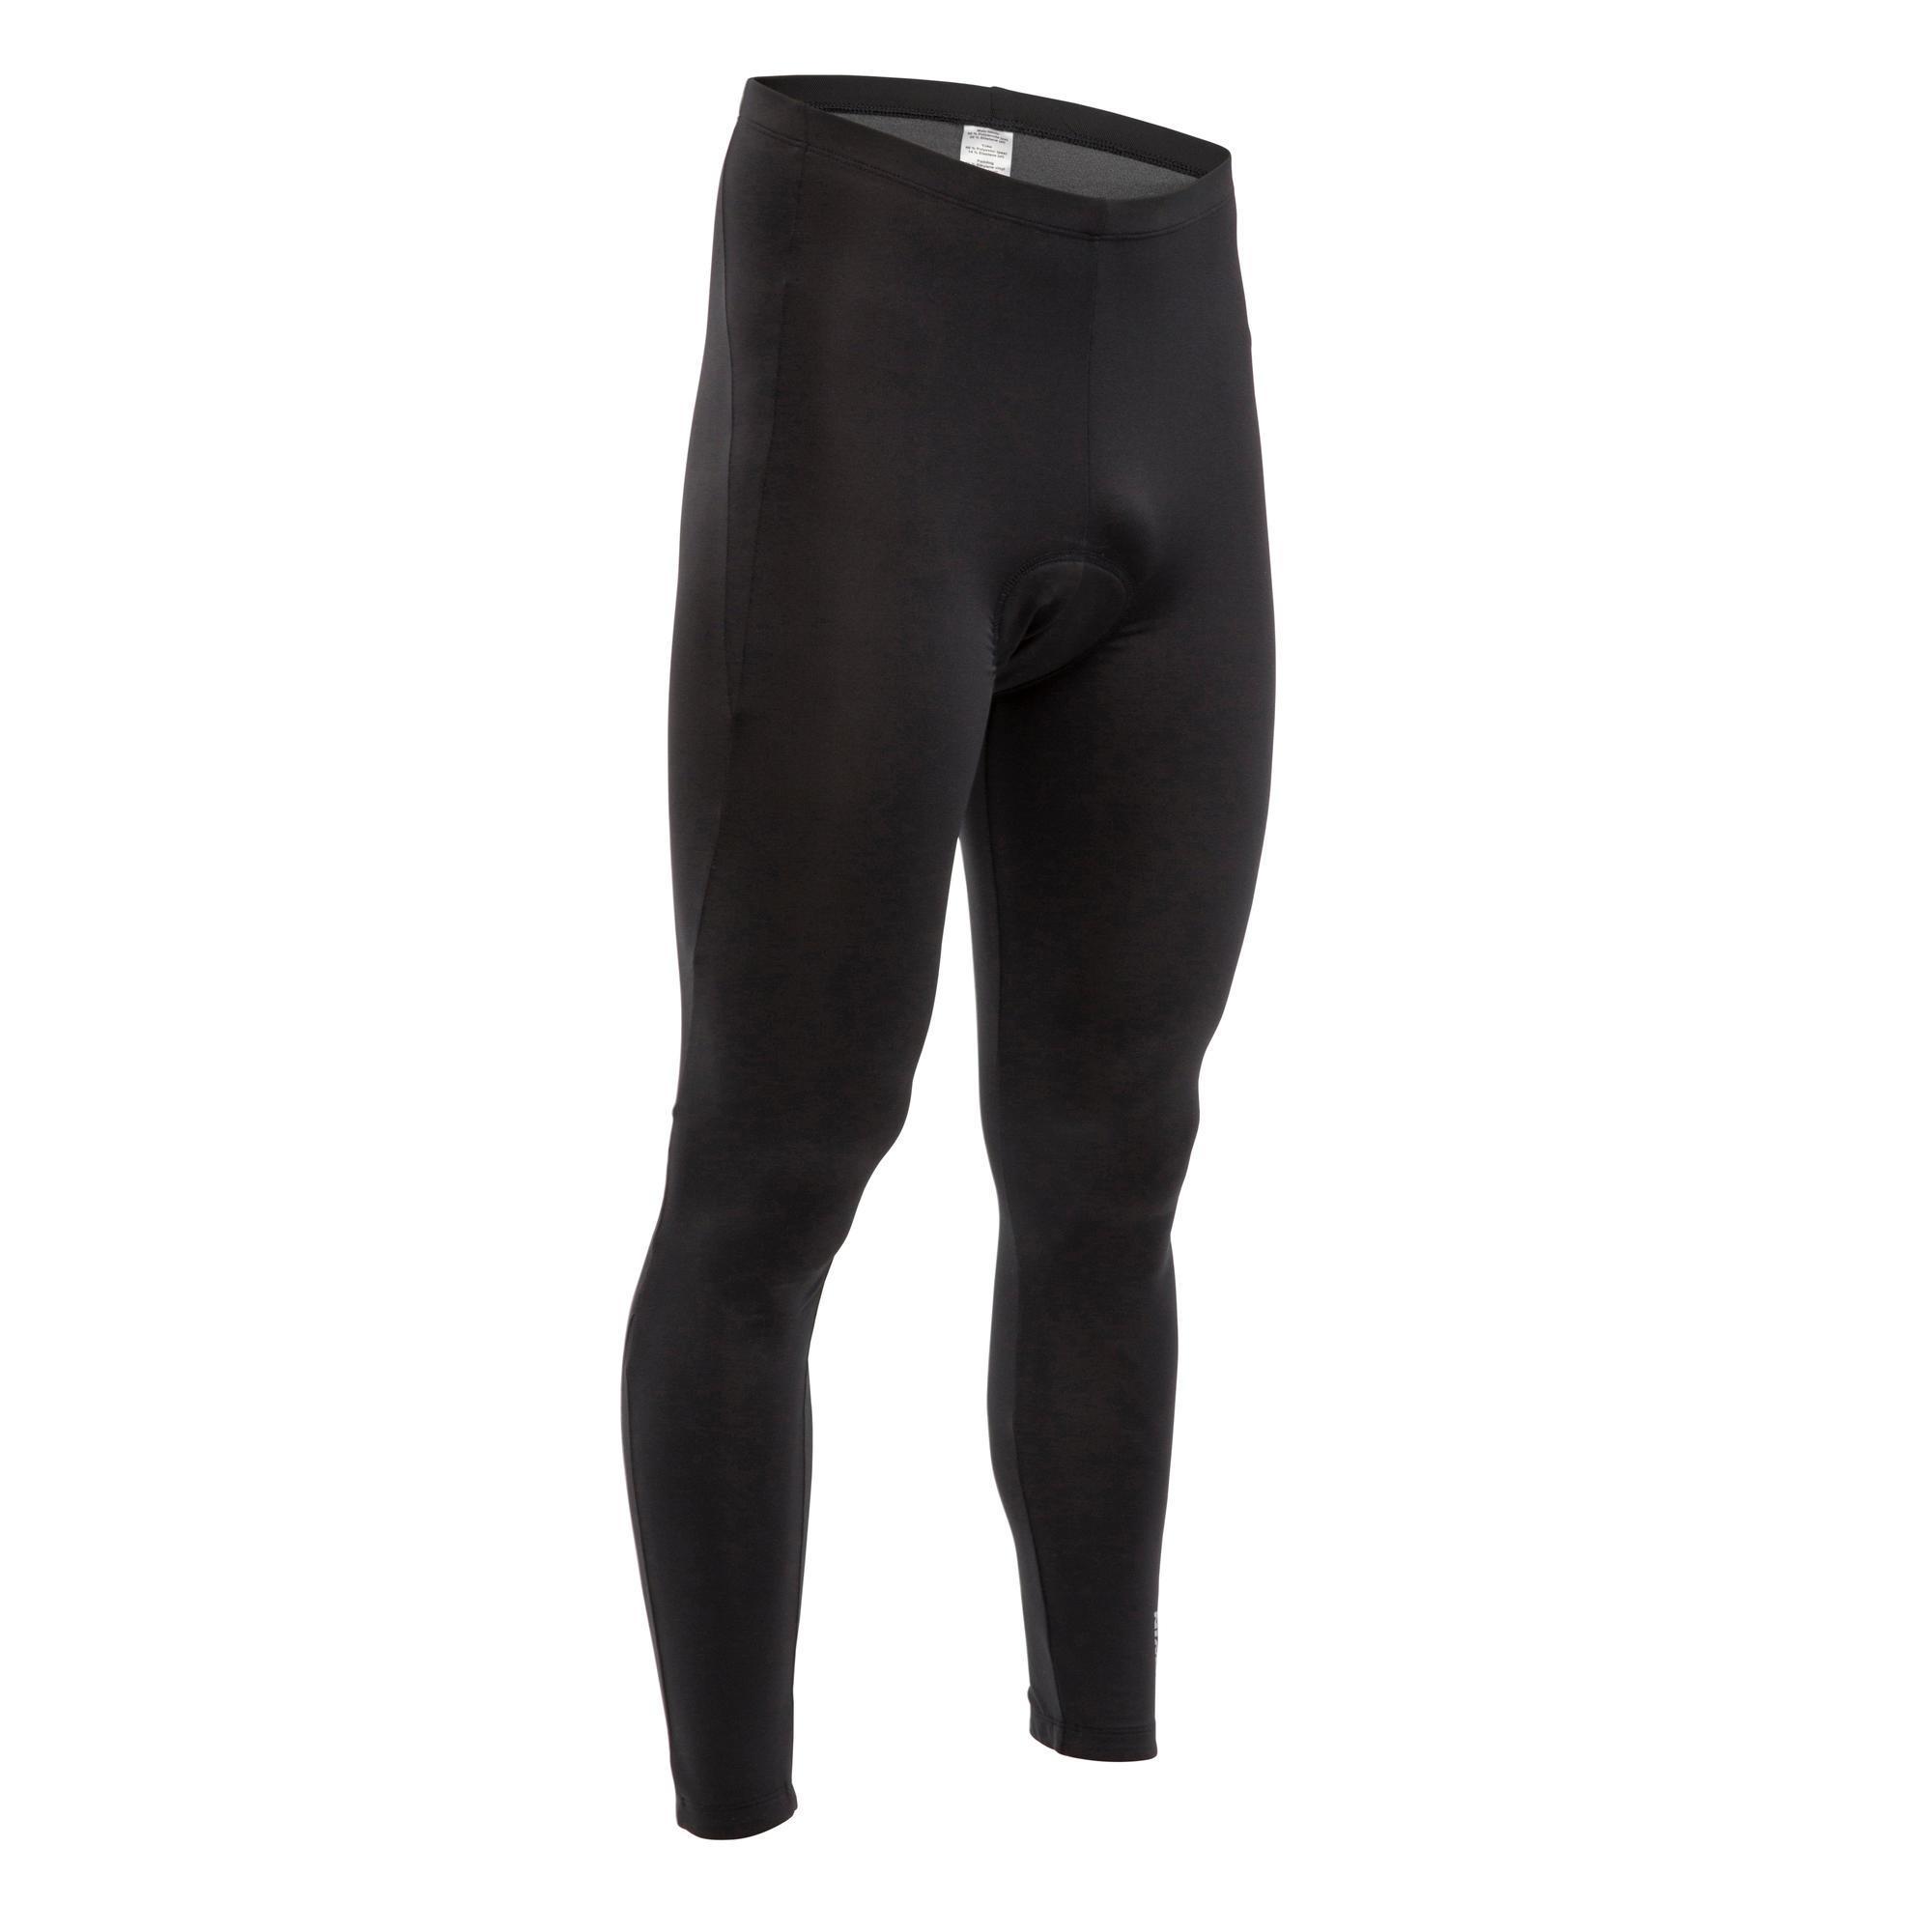 Bellwether Thermaldress Mens Cycling Tights with Pad | Ivanhoe Cycles